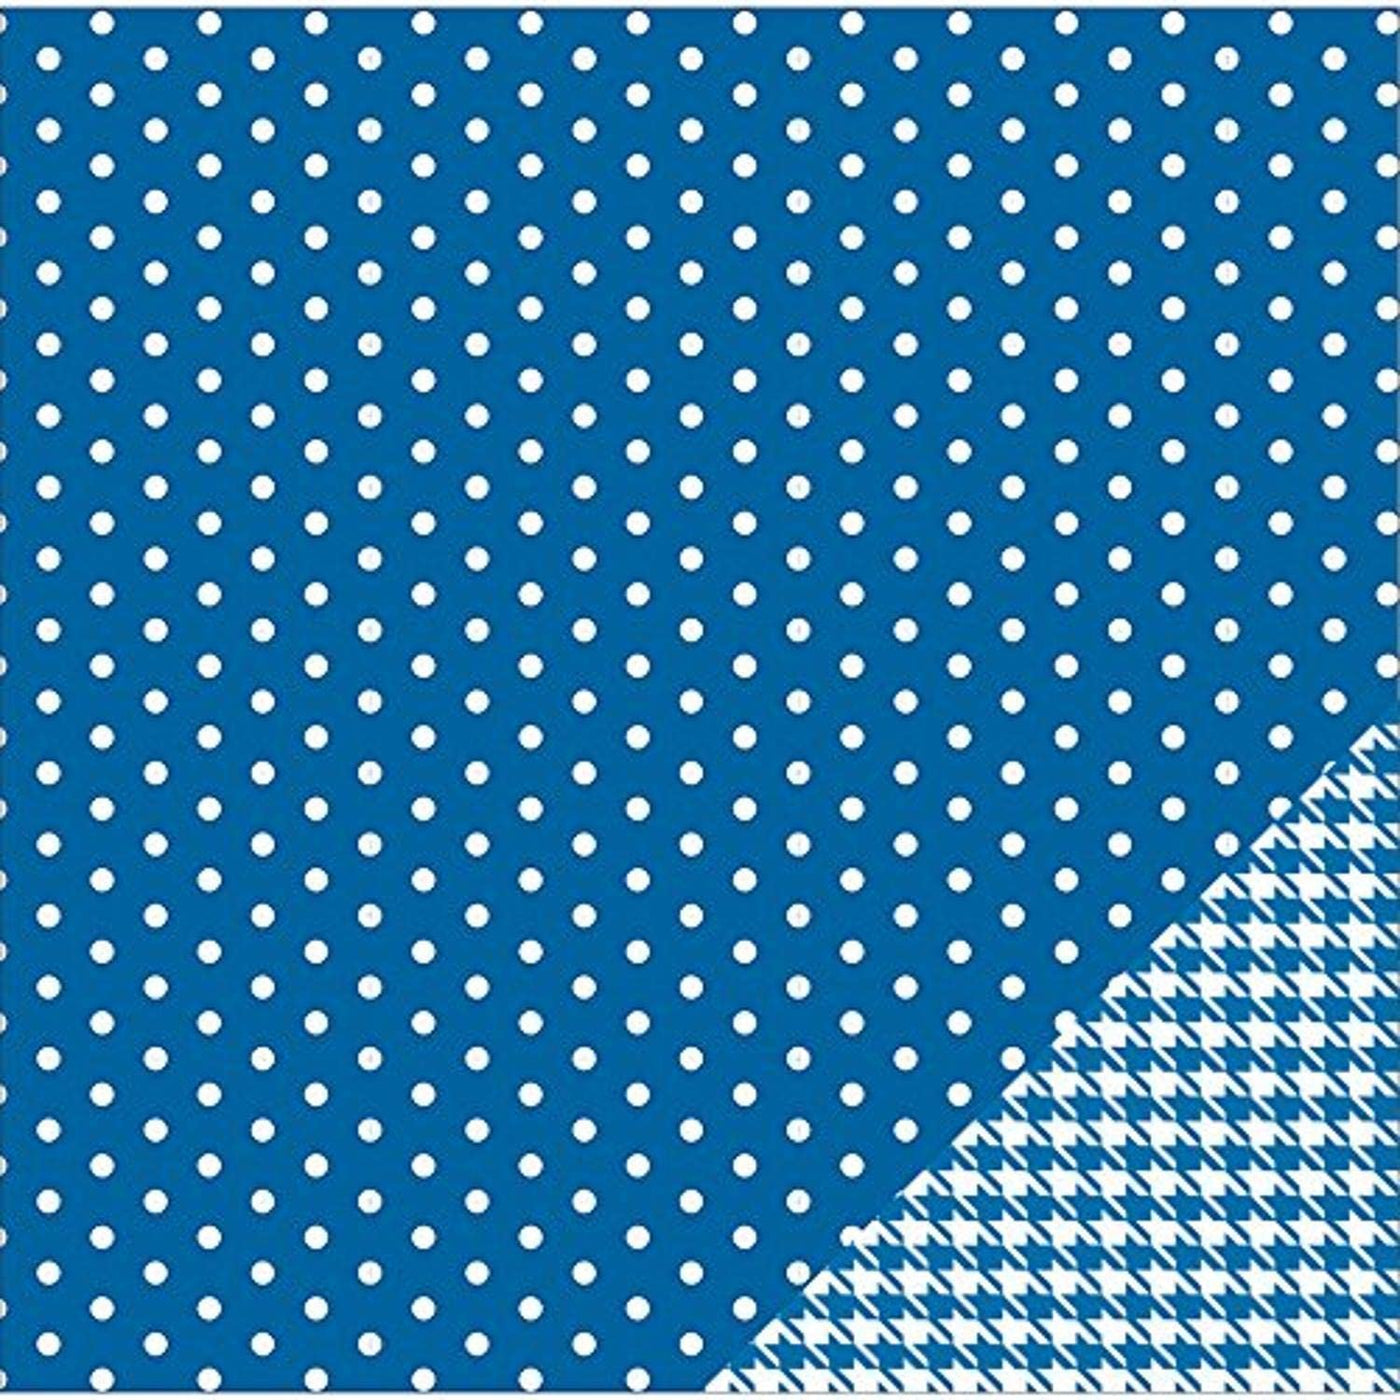 Multi-colored (Side A - white dots on navy blue background, Side B - blue and white houndstooth pattern)